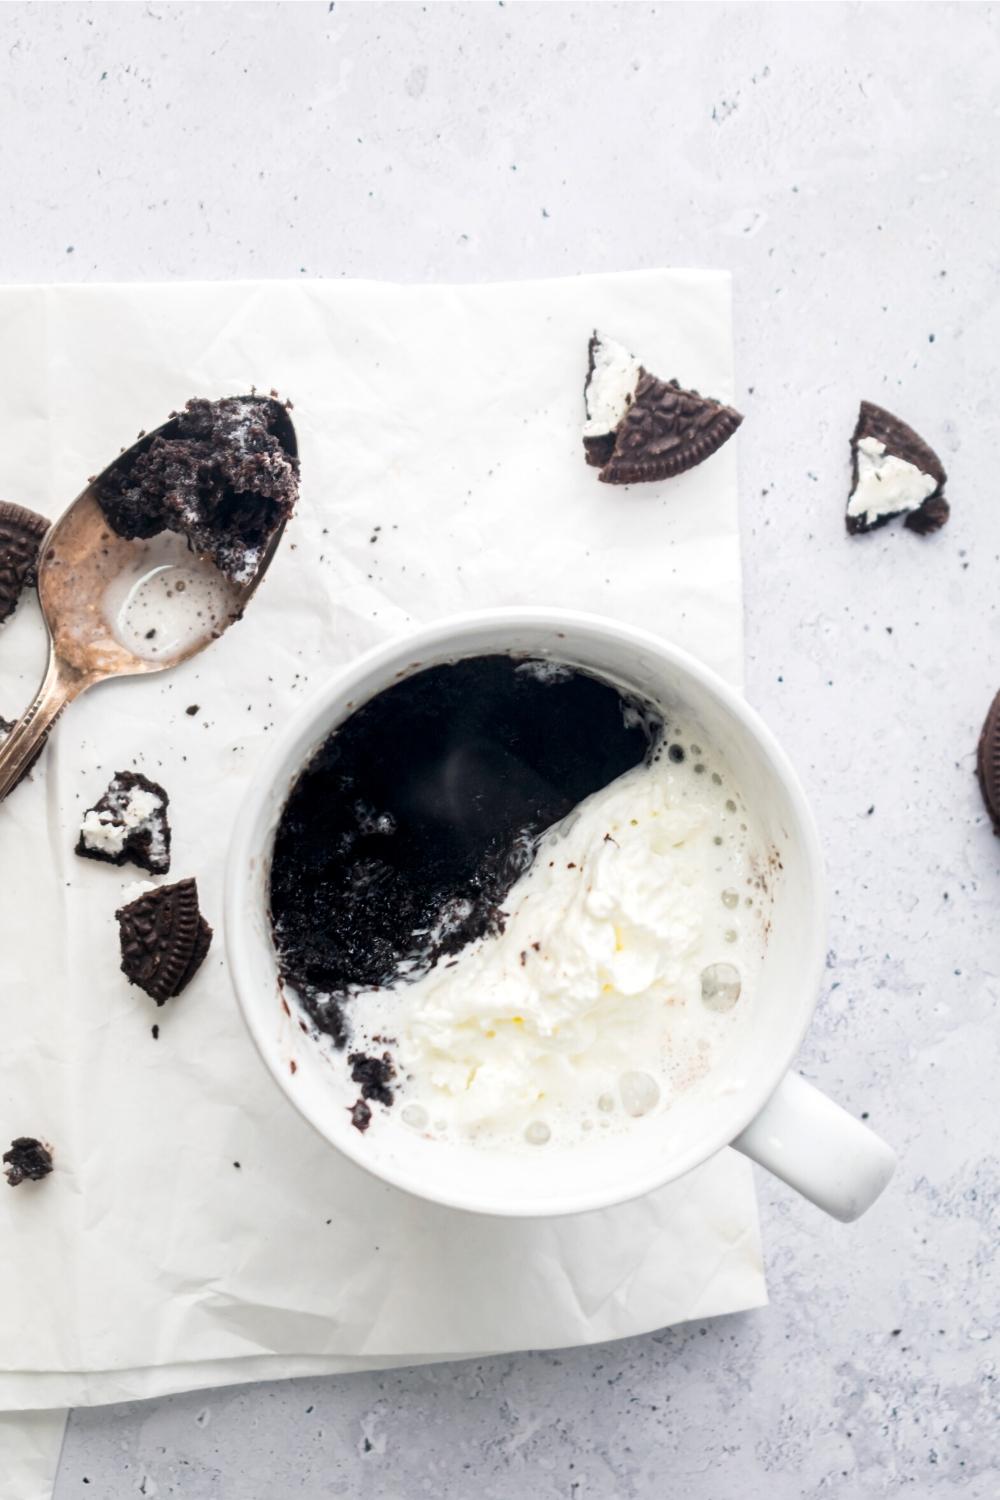 Half whipped cream and a half Oreo mug cake in a white bag on a napkin or a white counter. There's a spoon covered and Oreo mug cake and some pieces of Oreo around the mug.